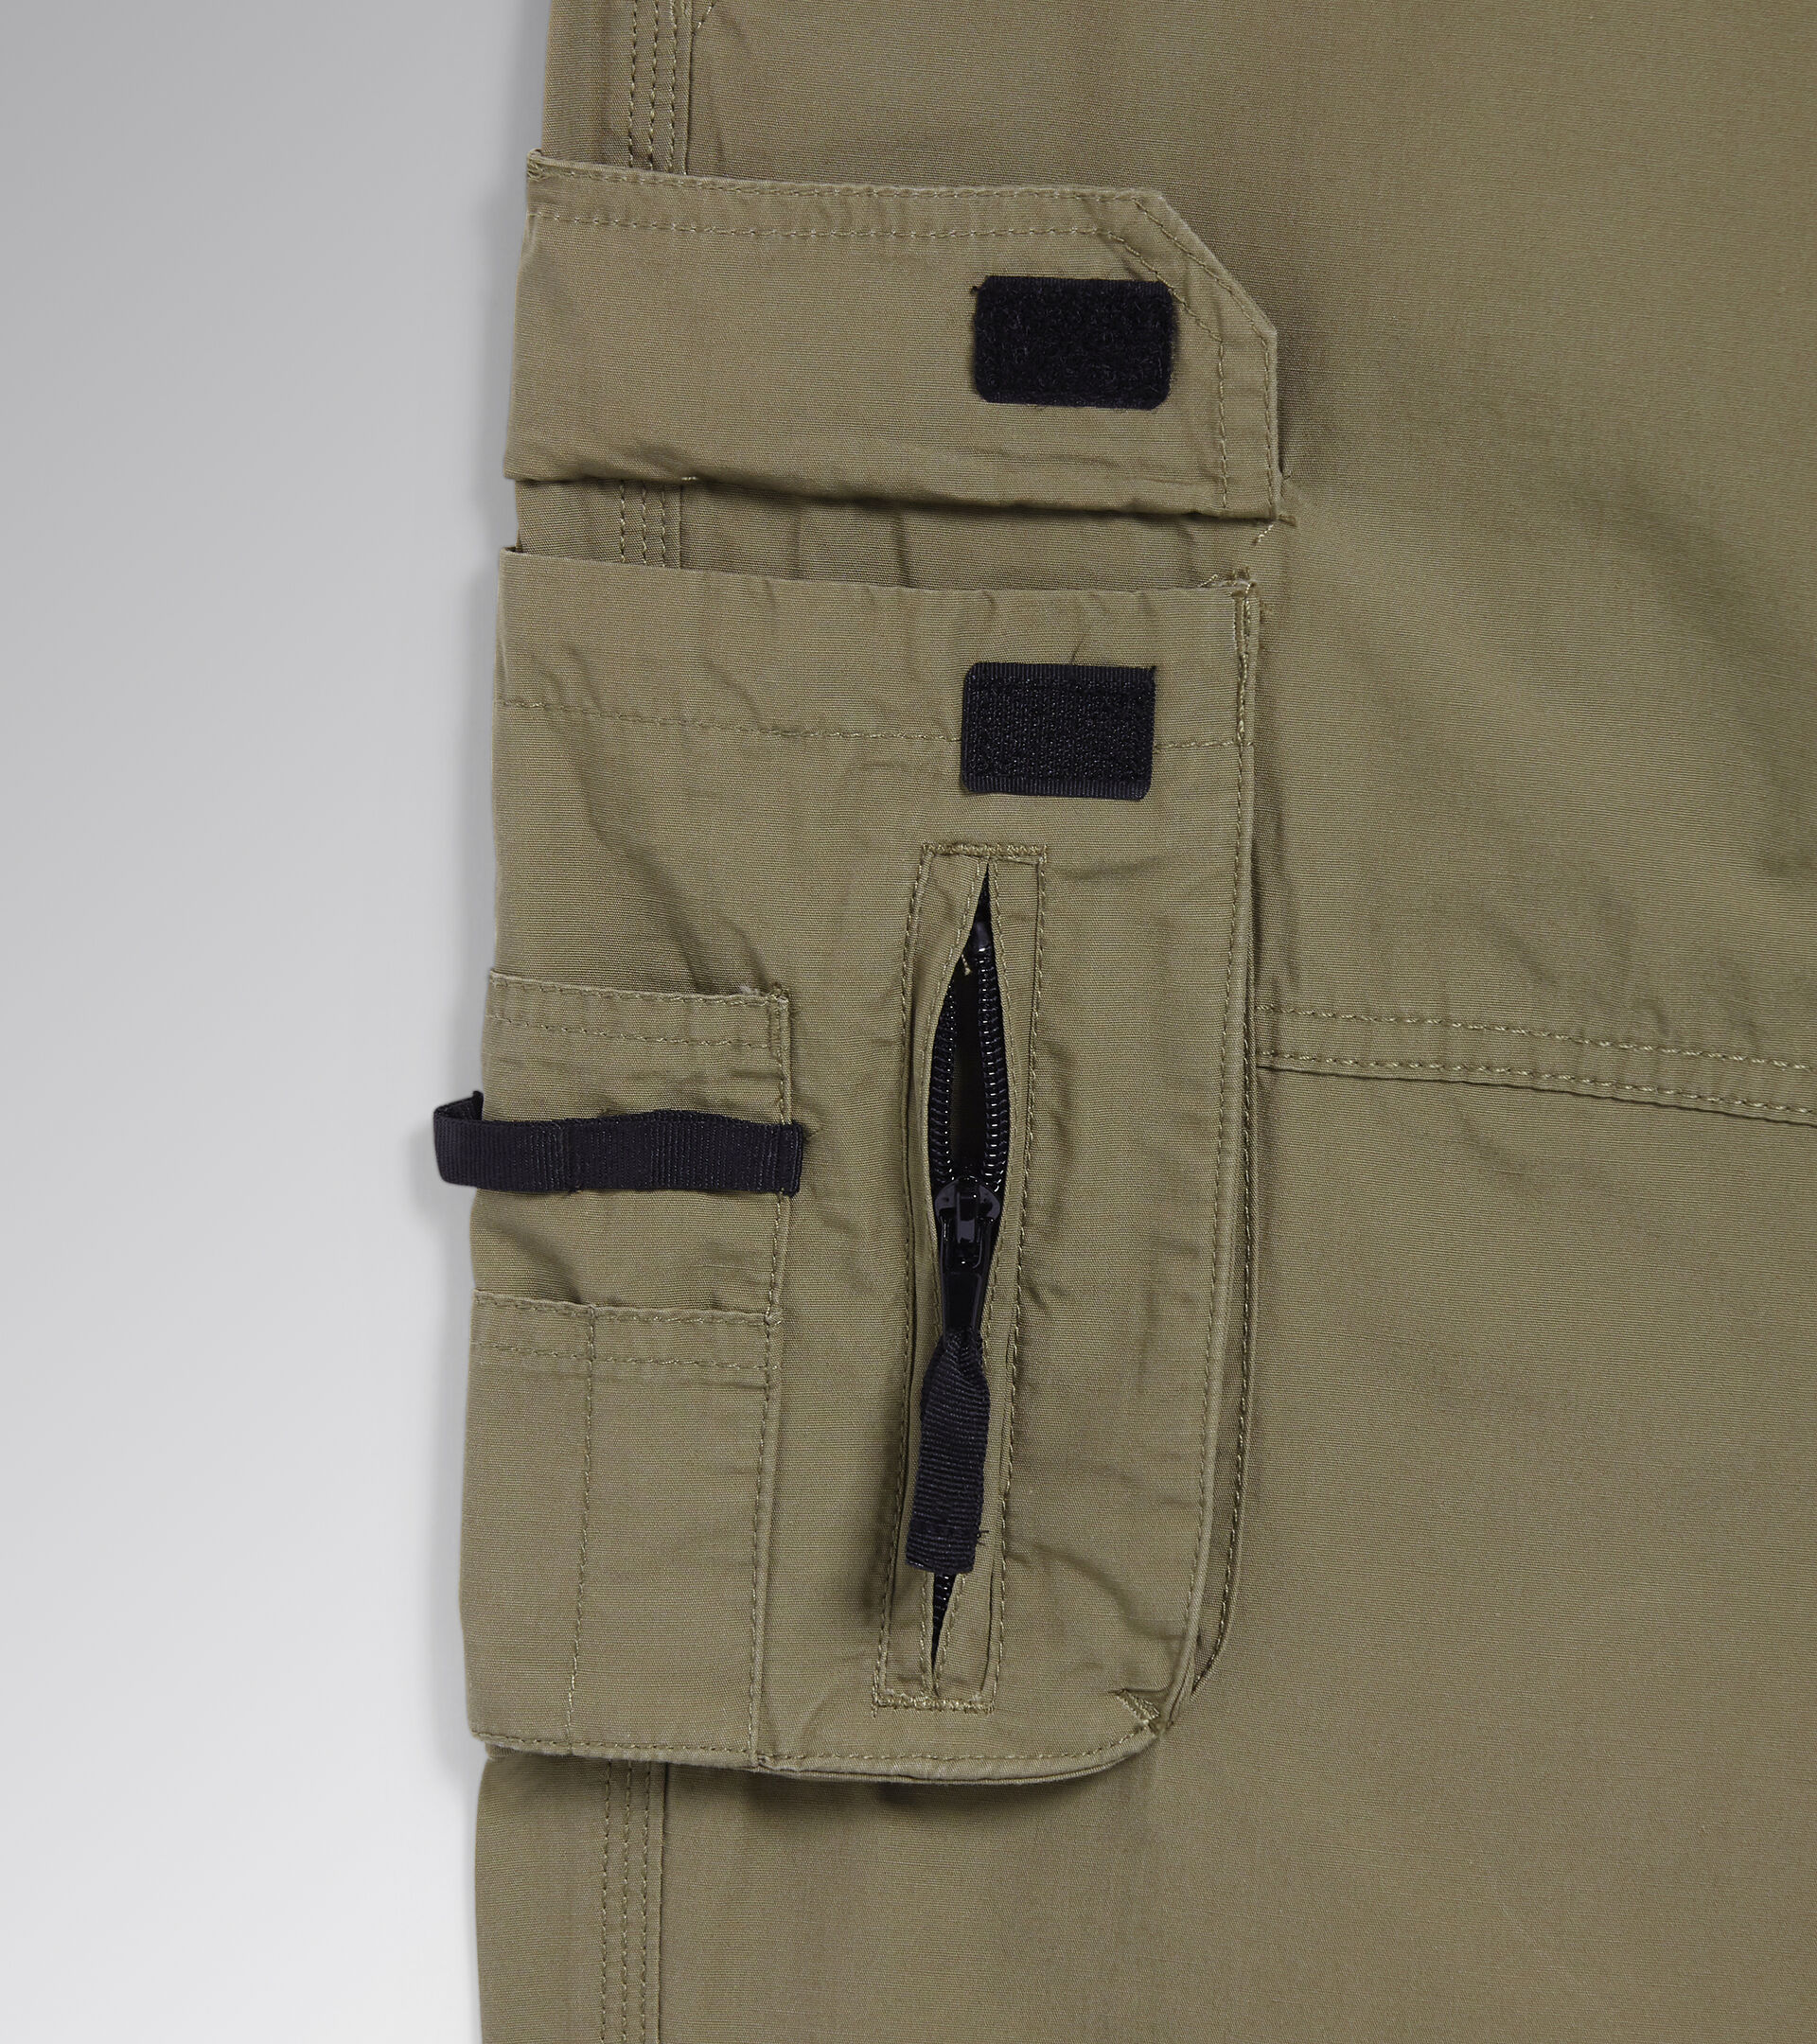 Work trousers PANT WIN CARGO BEIGE CLASSIC - Utility